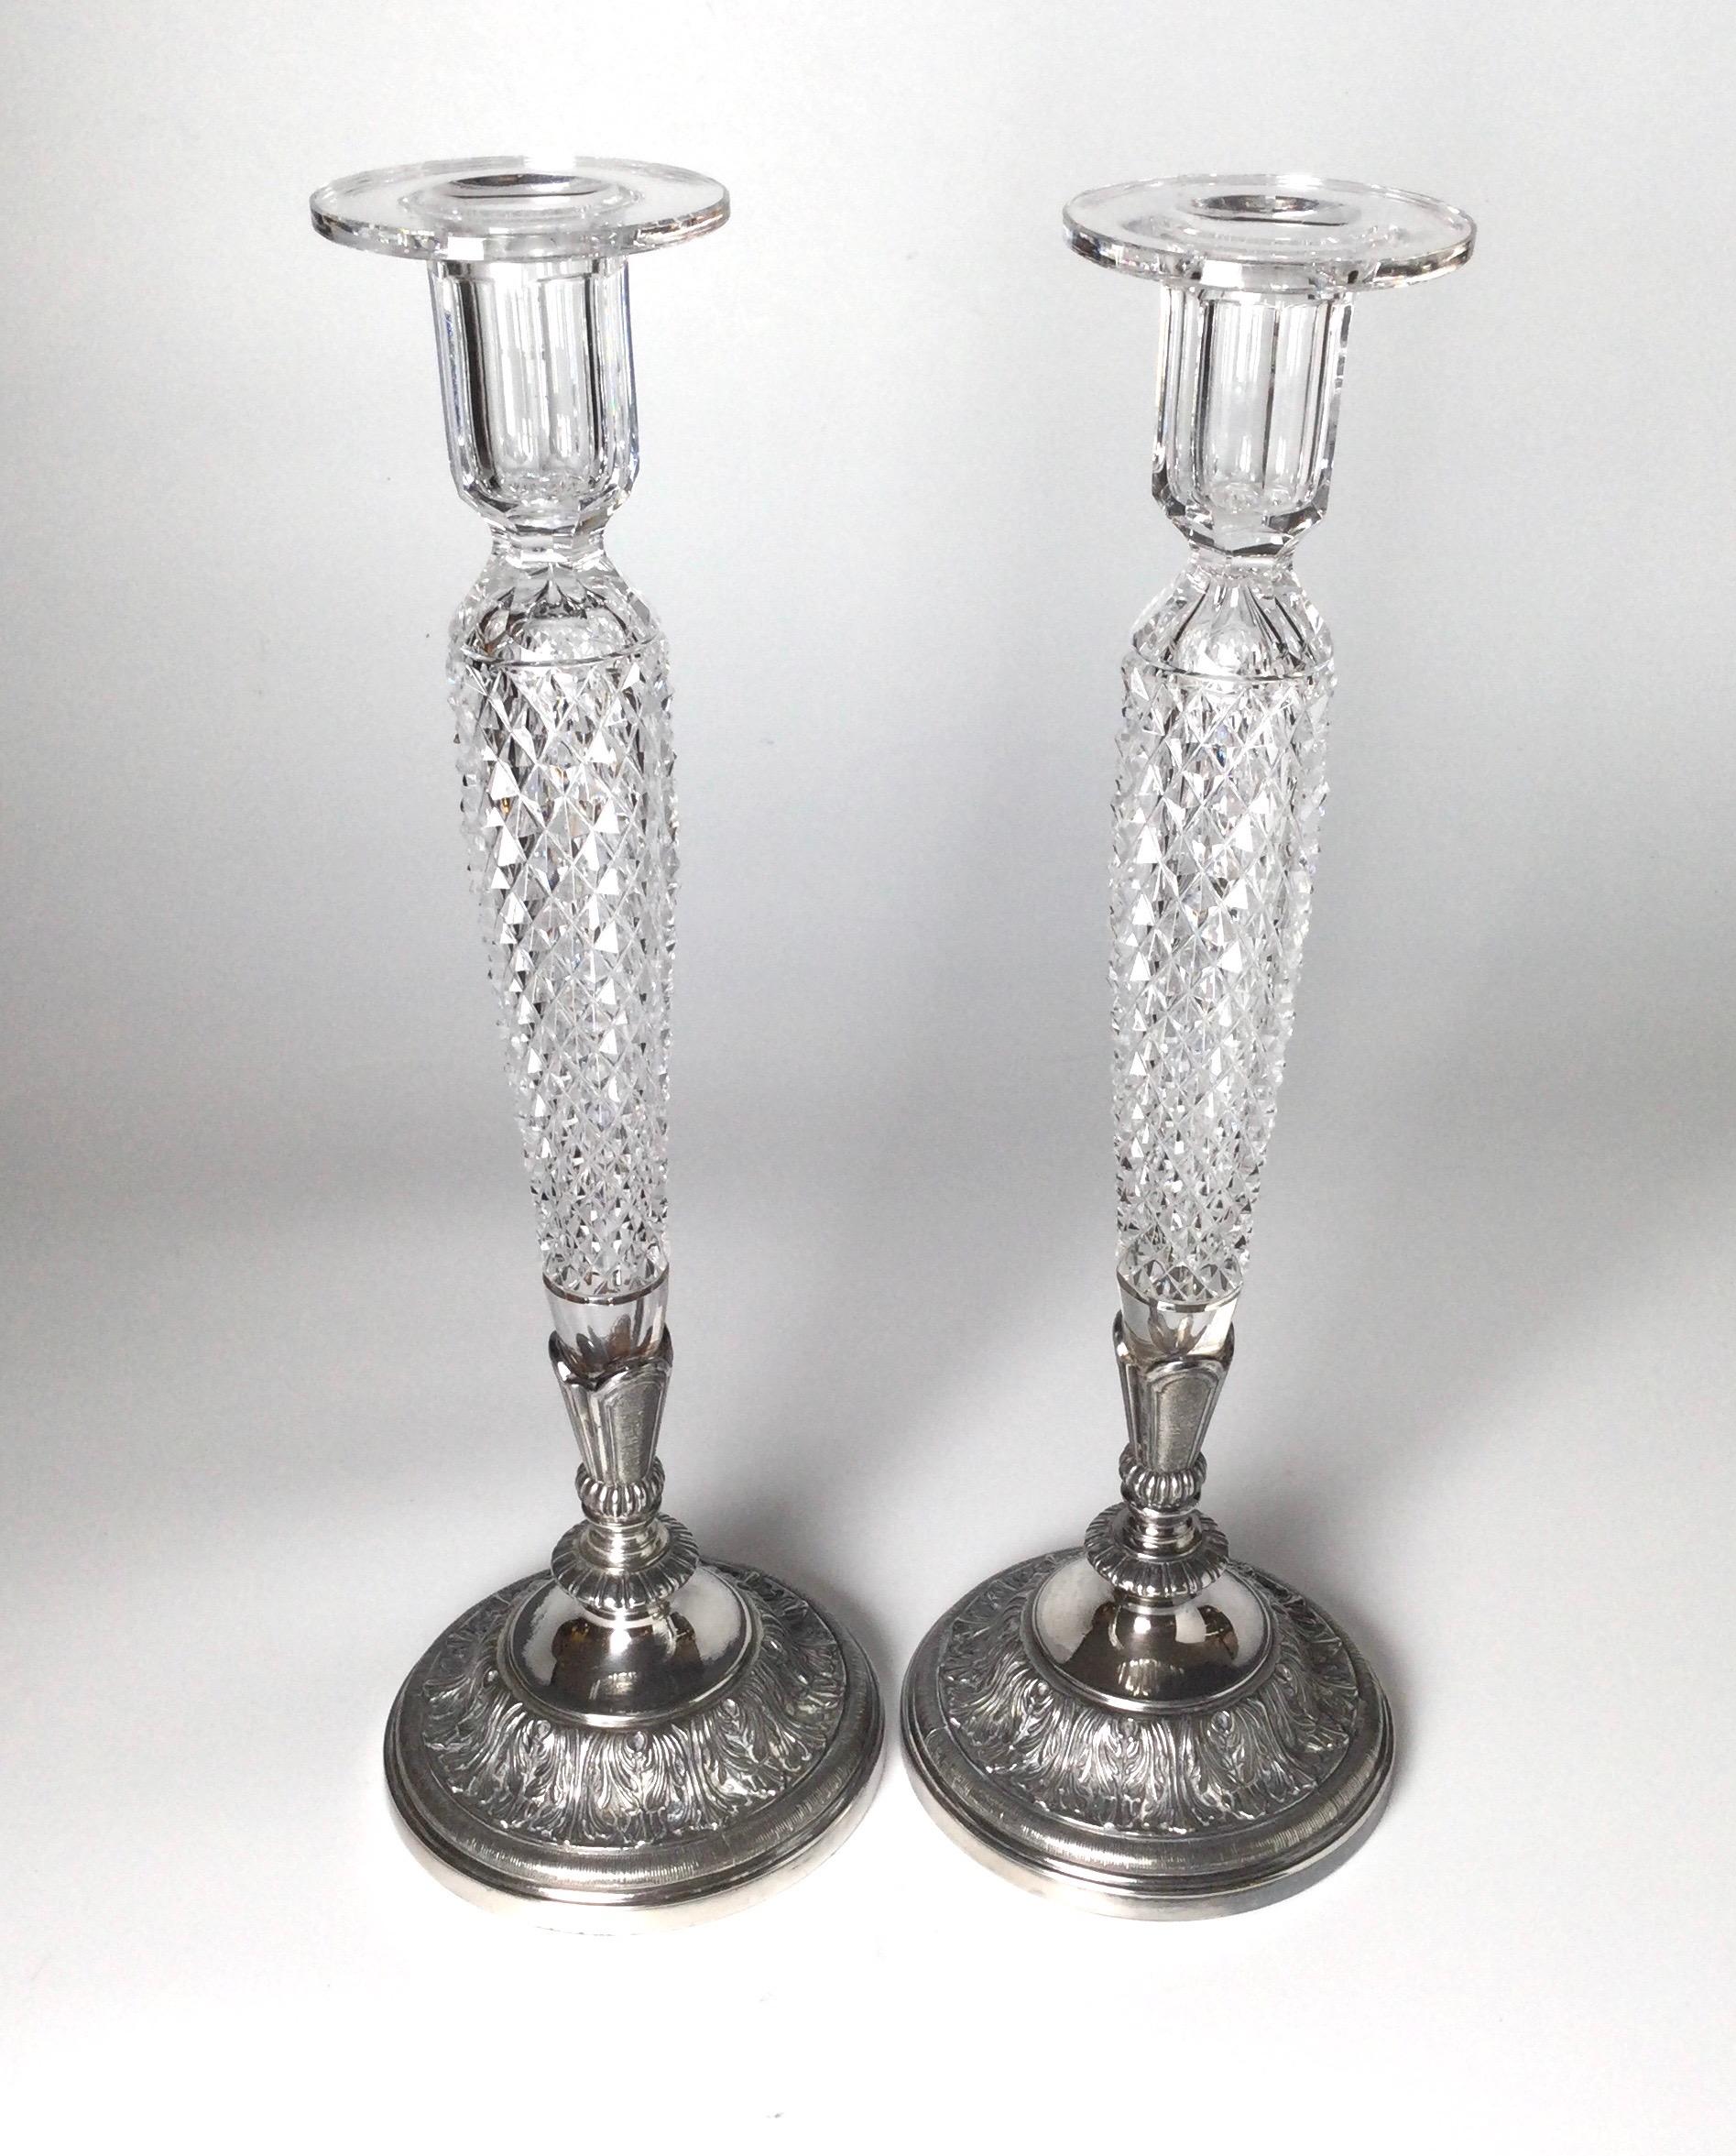 A pair of elegant tall candlesticks with a diamond cut bodies with silver-plate bases with acanthus leaf decoration, signed on the bottom Pairpoint. 16 inches tall.